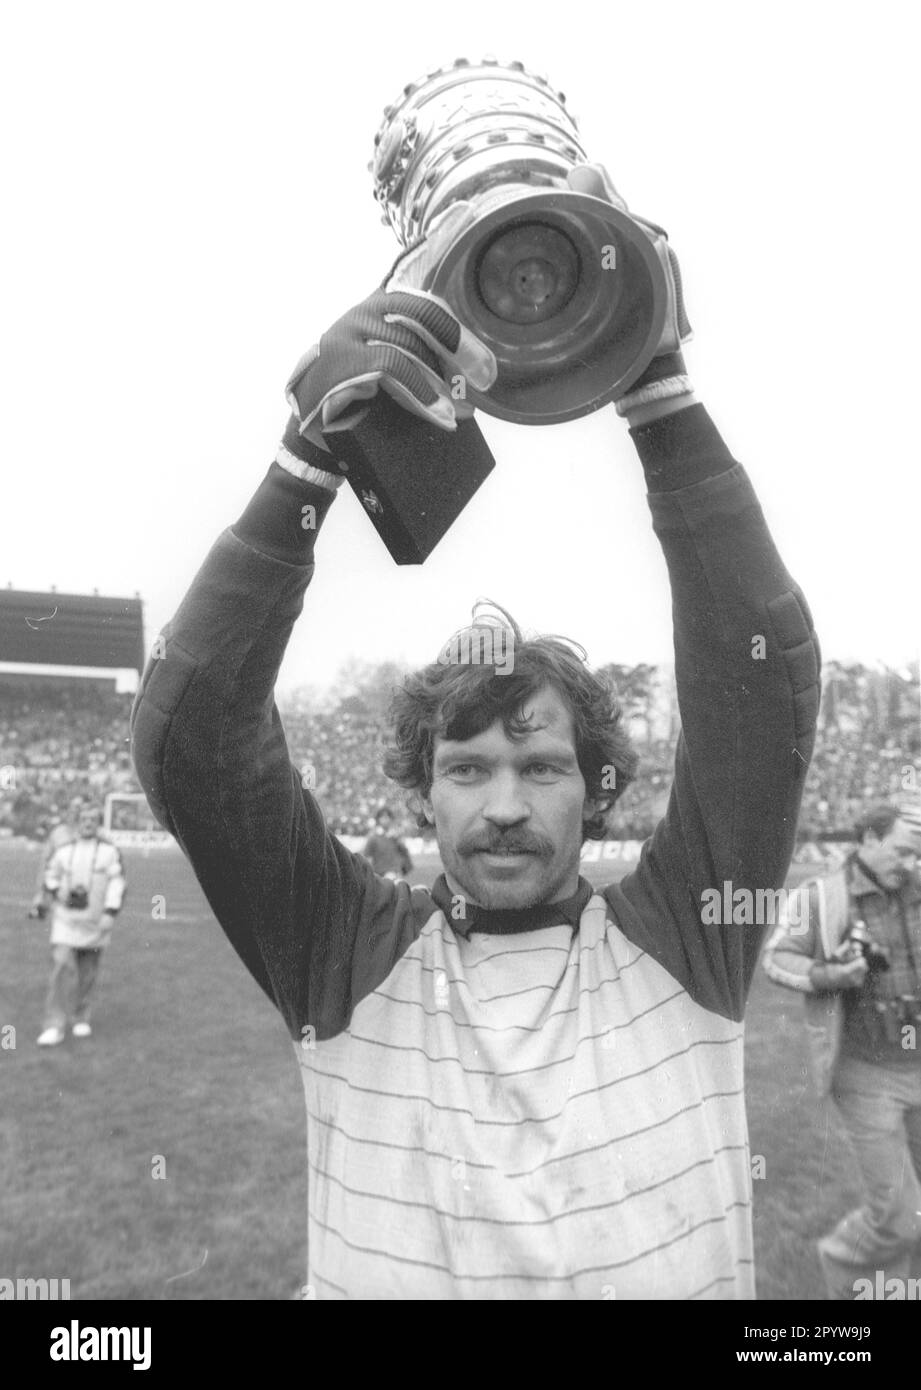 DFB Cup final FC Bayern Muenchen - 1. FC Nuernberg 4:2 /01.05.1982/ Goalkeeper Manfred Mueller (FCB) with the DFB cup [automated translation] Stock Photo